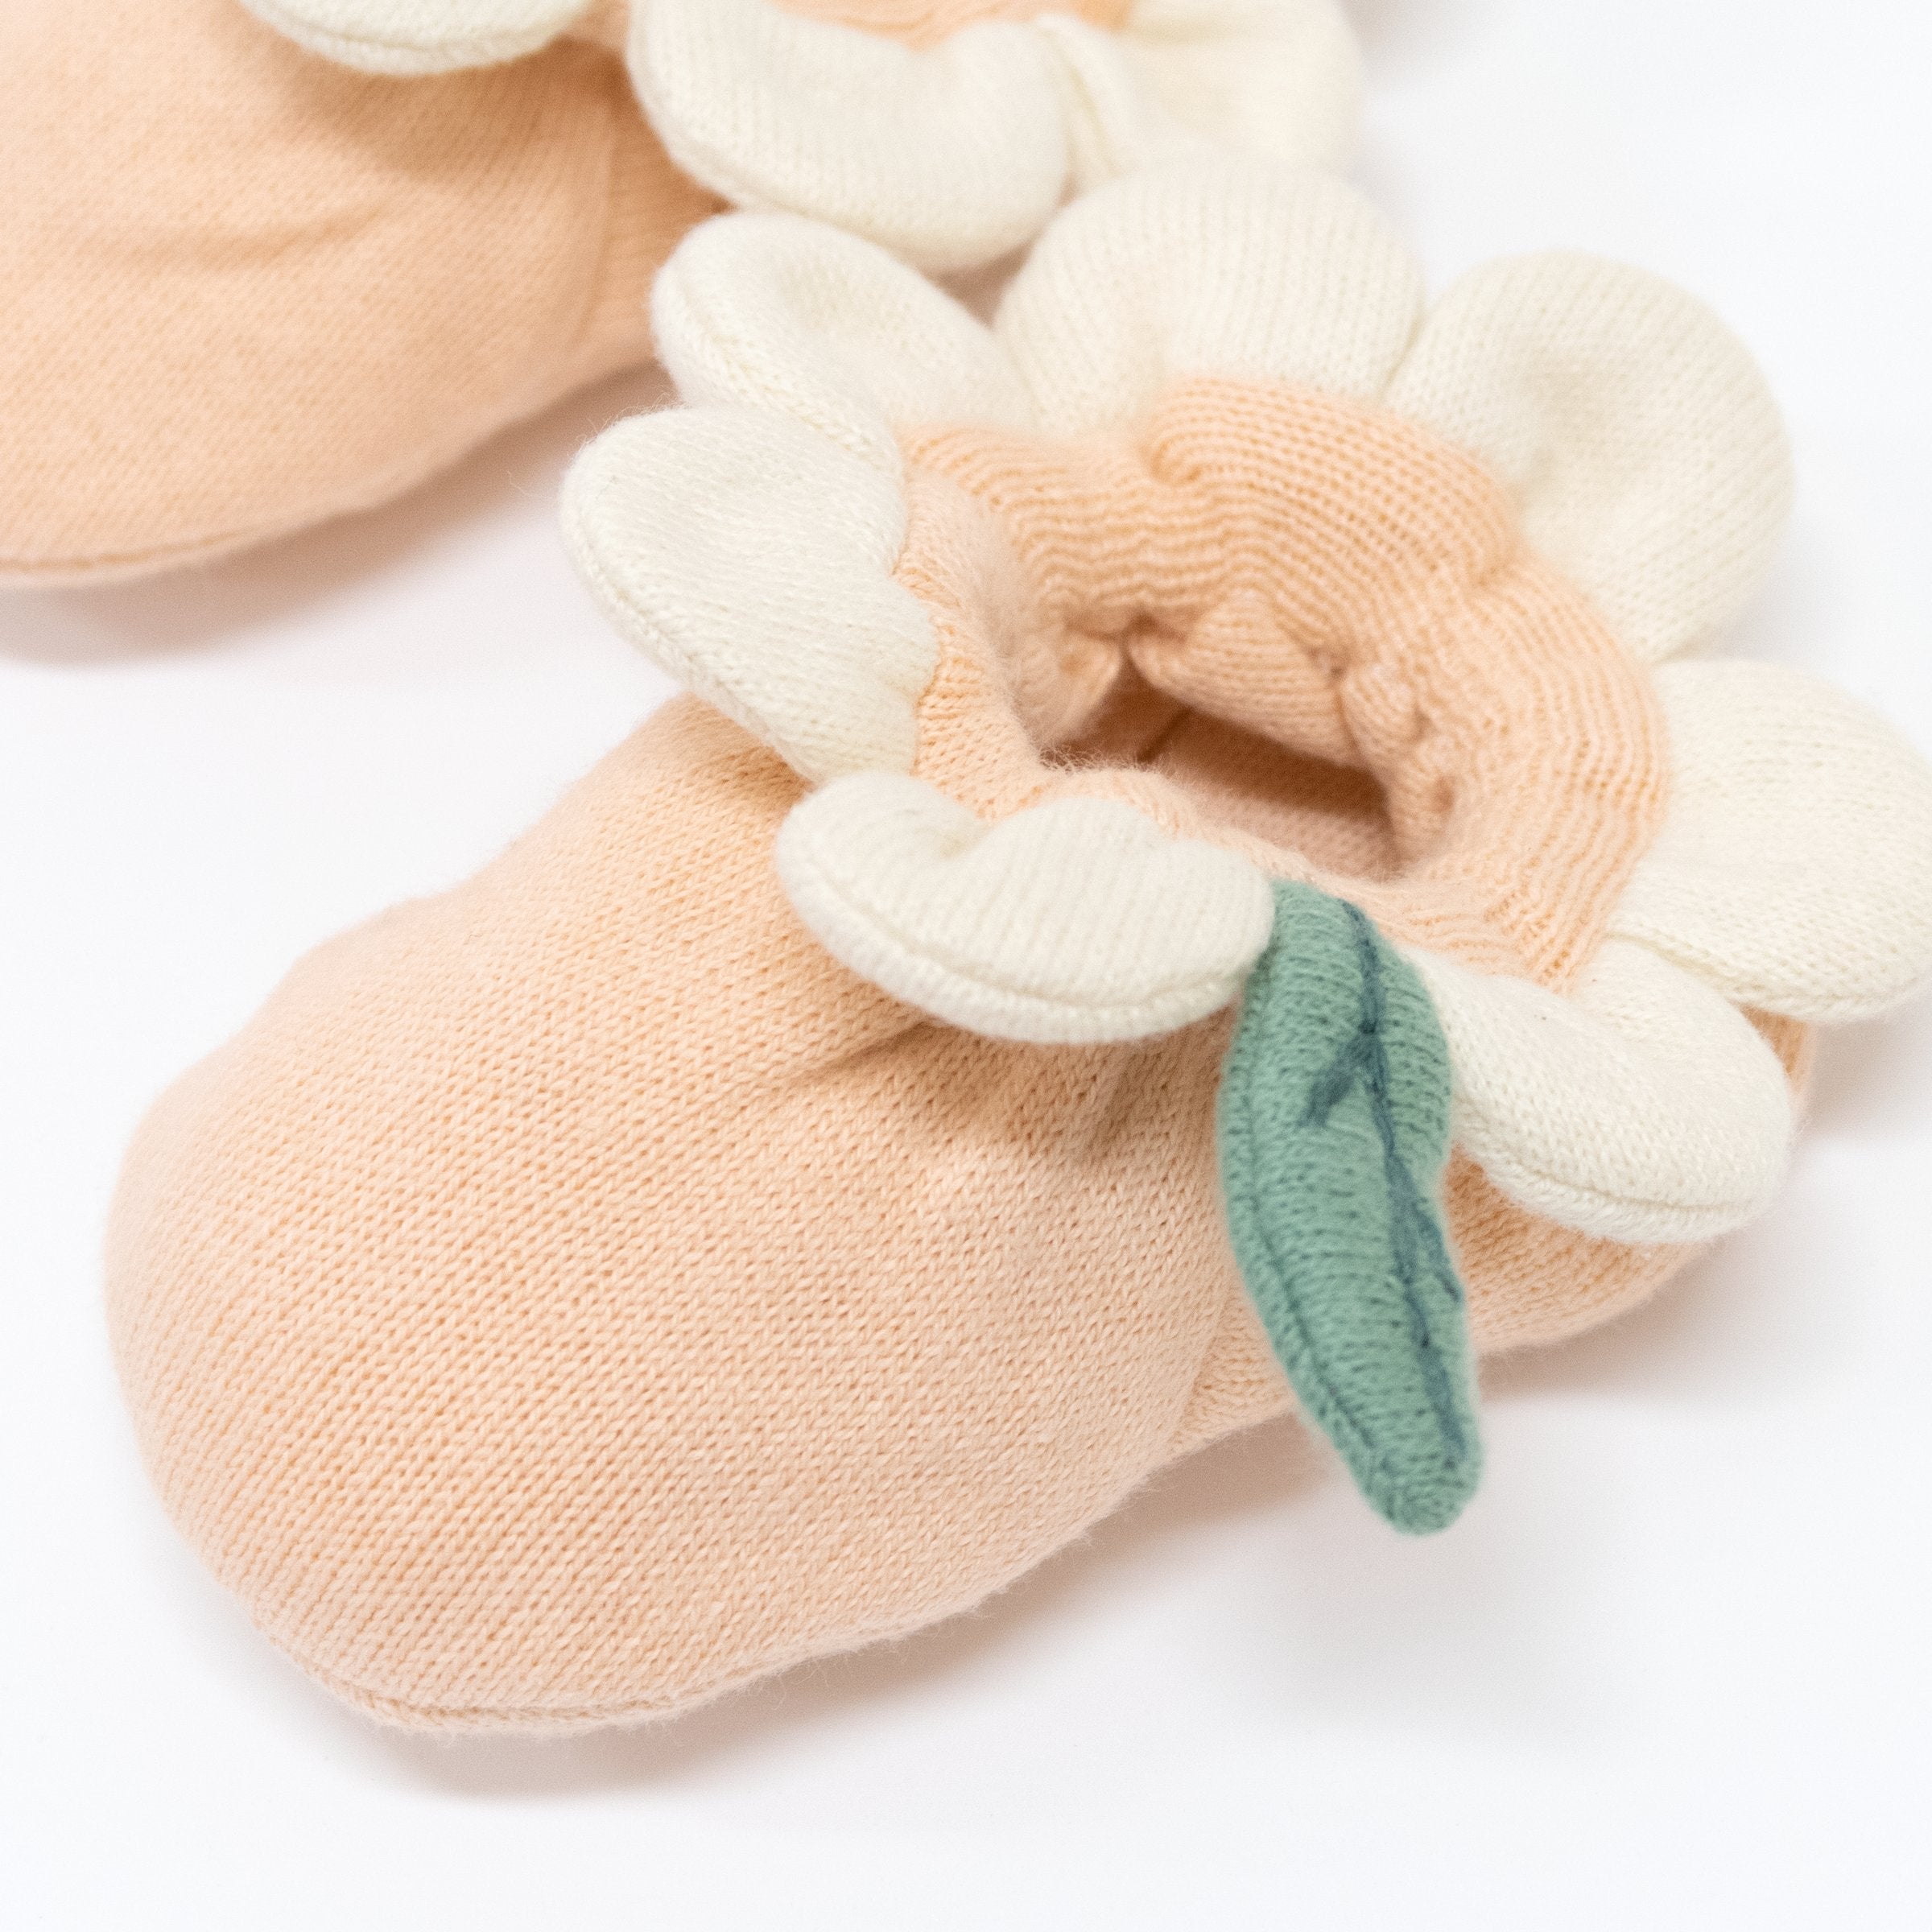 These peach daisy baby booties are crafted from knitted organic cotton, with a peach inner, and cream petal and green leaf detail.